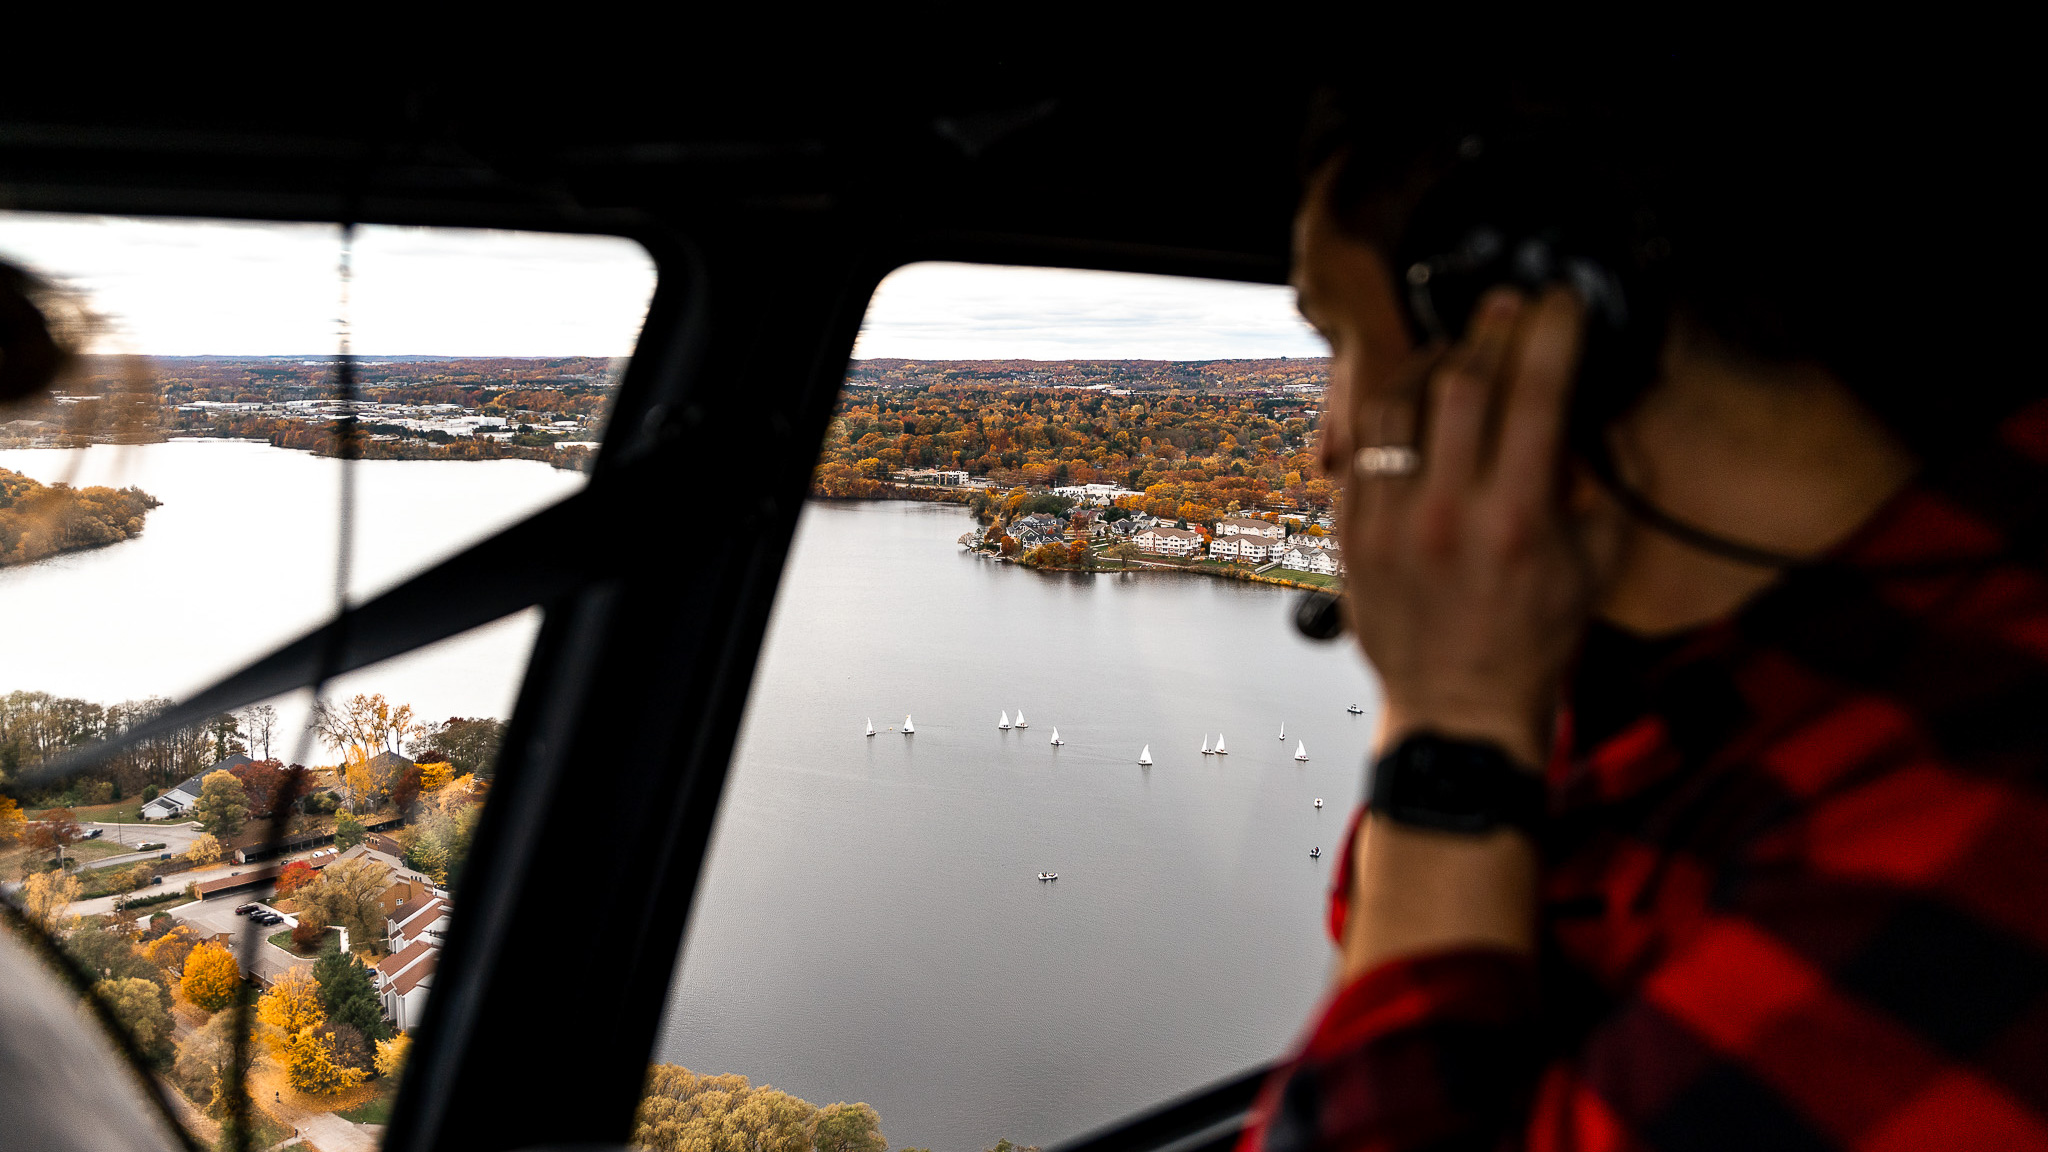  Experiencing a helicopter ride in Traverse City, Michigan, amidst the captivating beauty of the fall season.